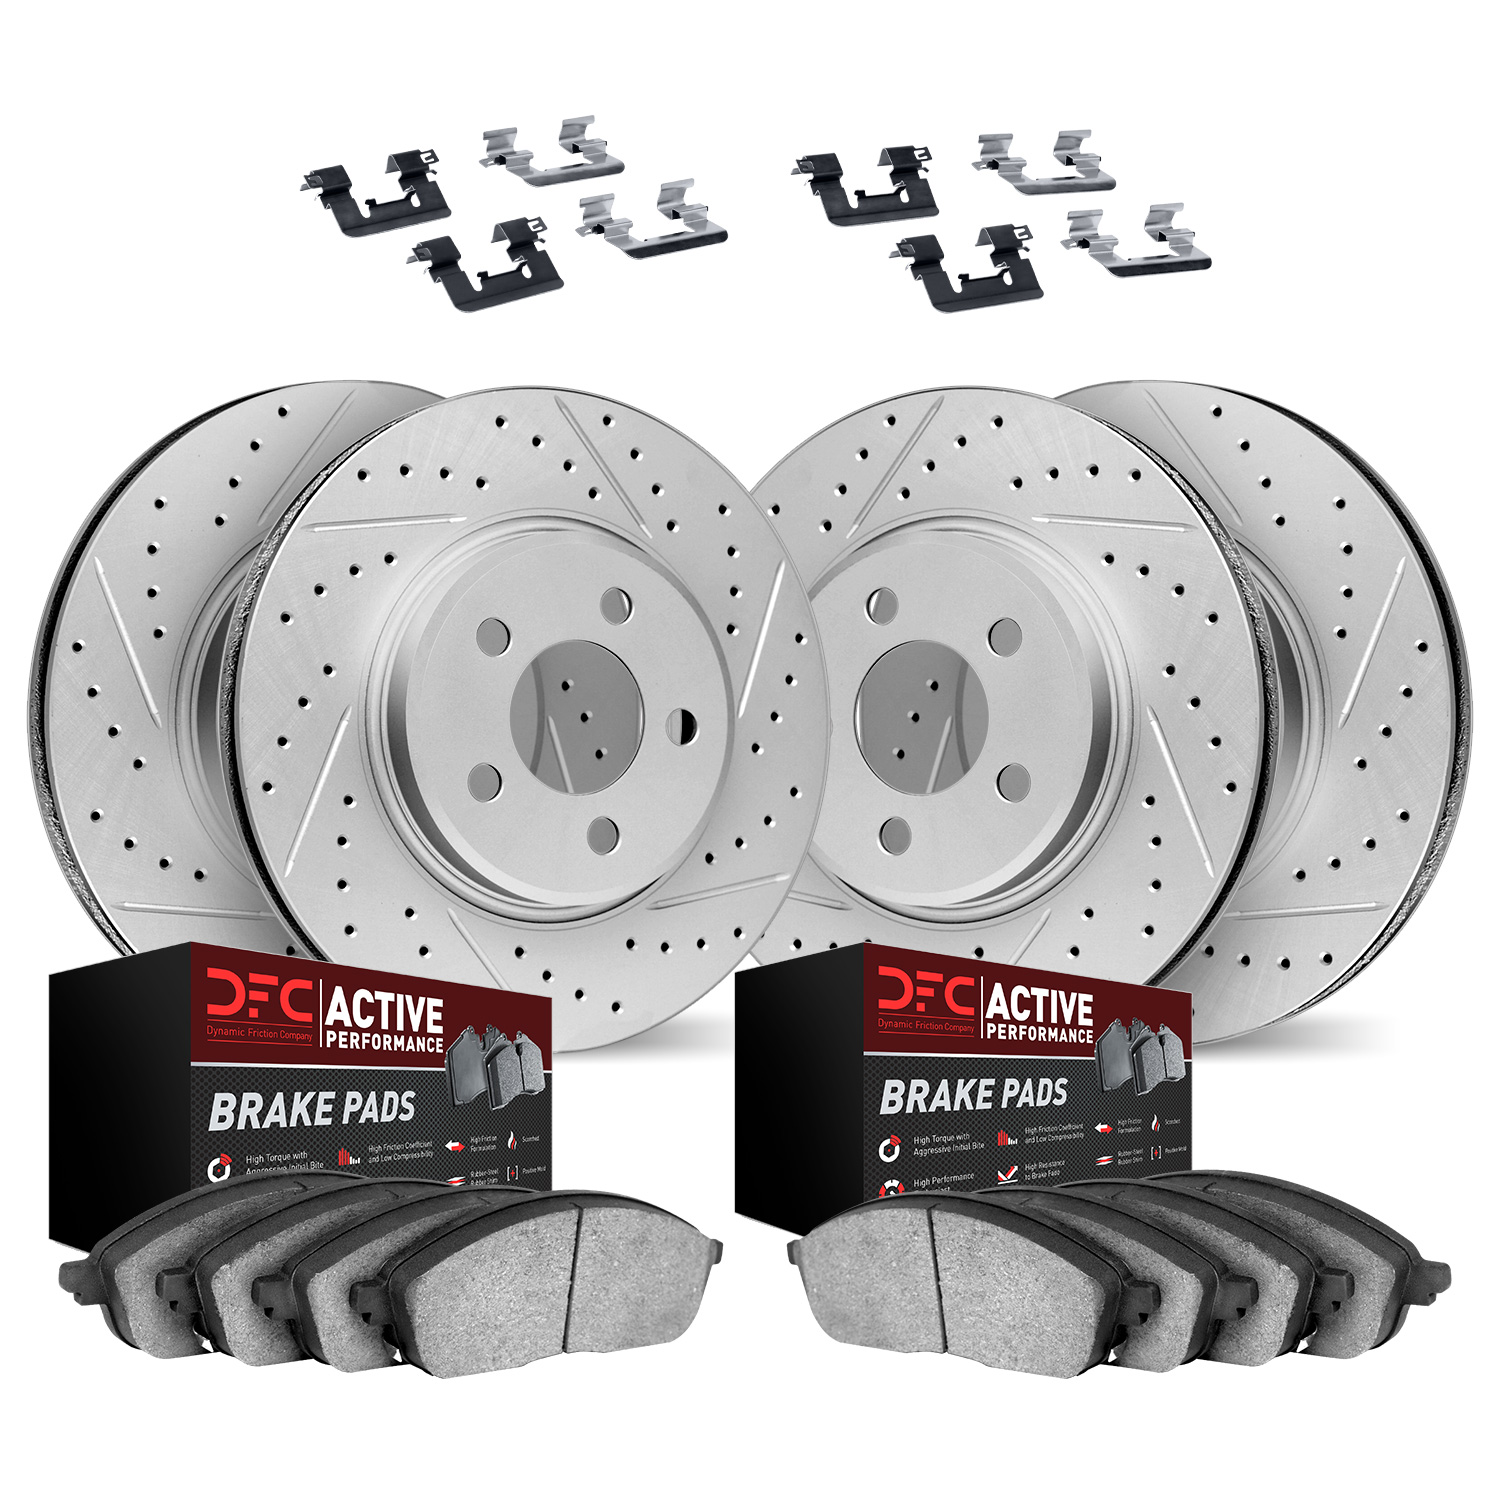 2714-67043 Geoperformance Drilled/Slotted Brake Rotors with Active Performance Pads Kit & Hardware, 2008-2015 Infiniti/Nissan, P